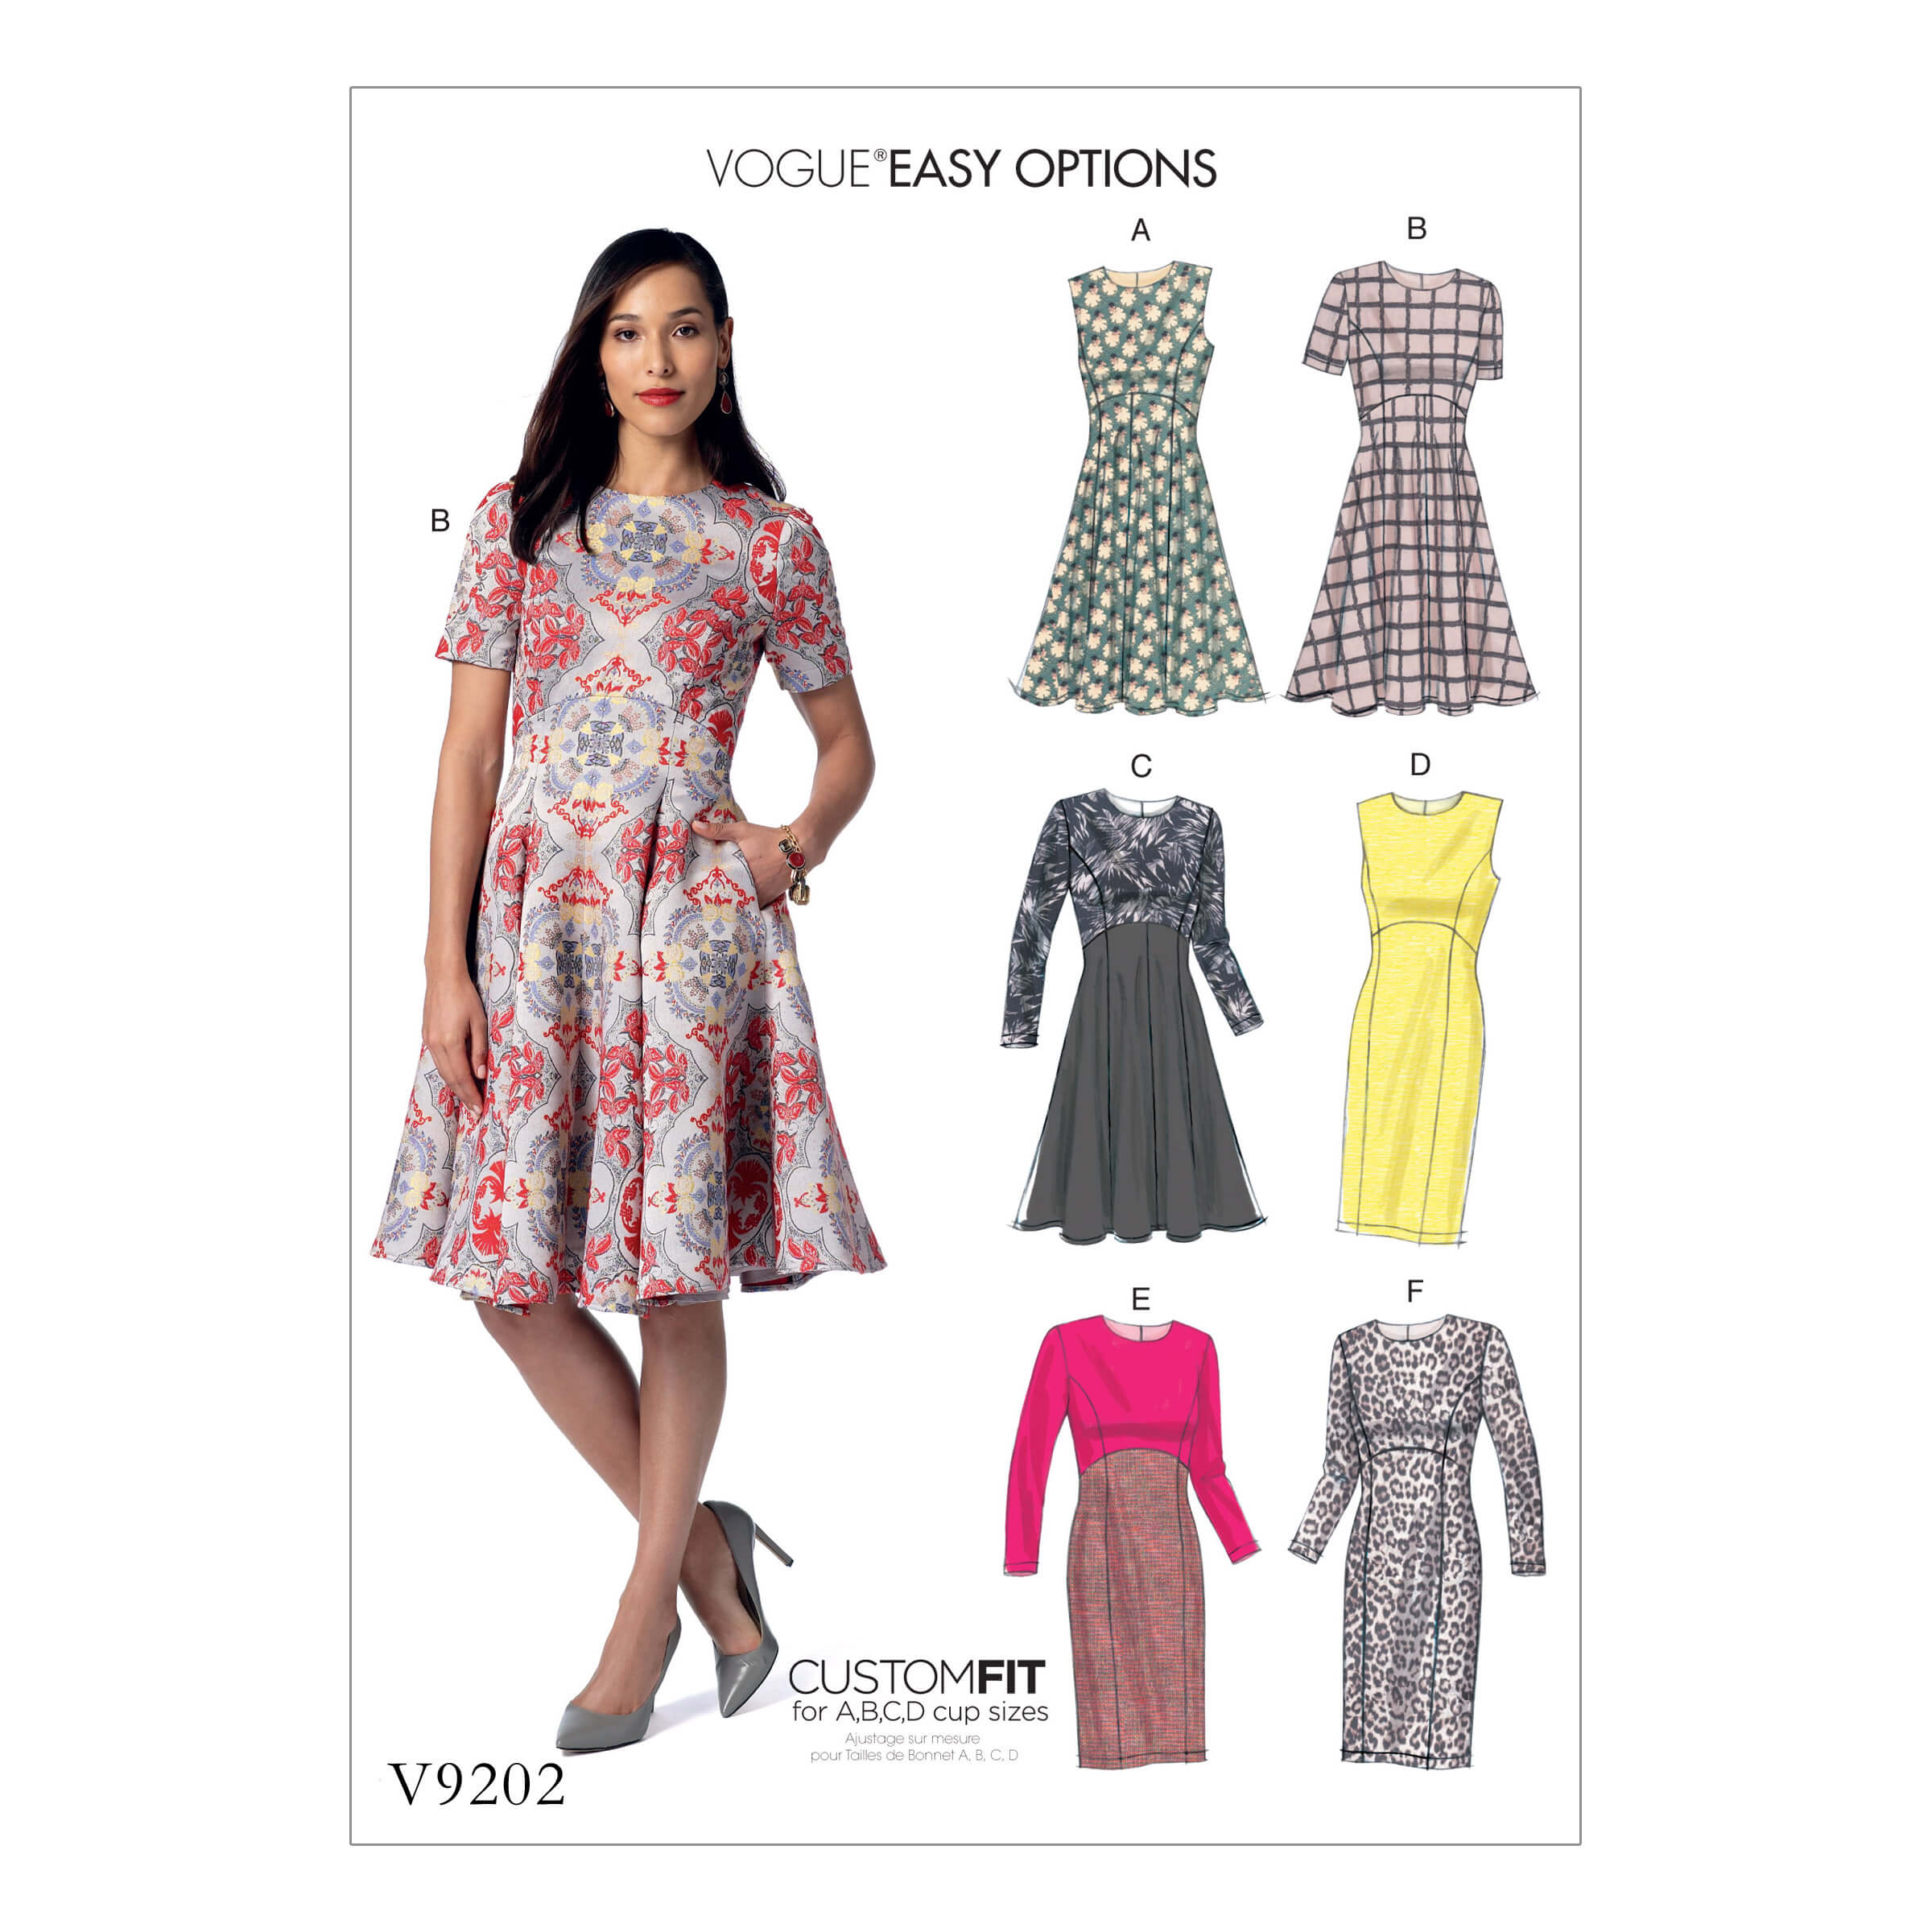 Vogue Patterns V9202 Misses' Dresses with Flared or Straight Skirt Options